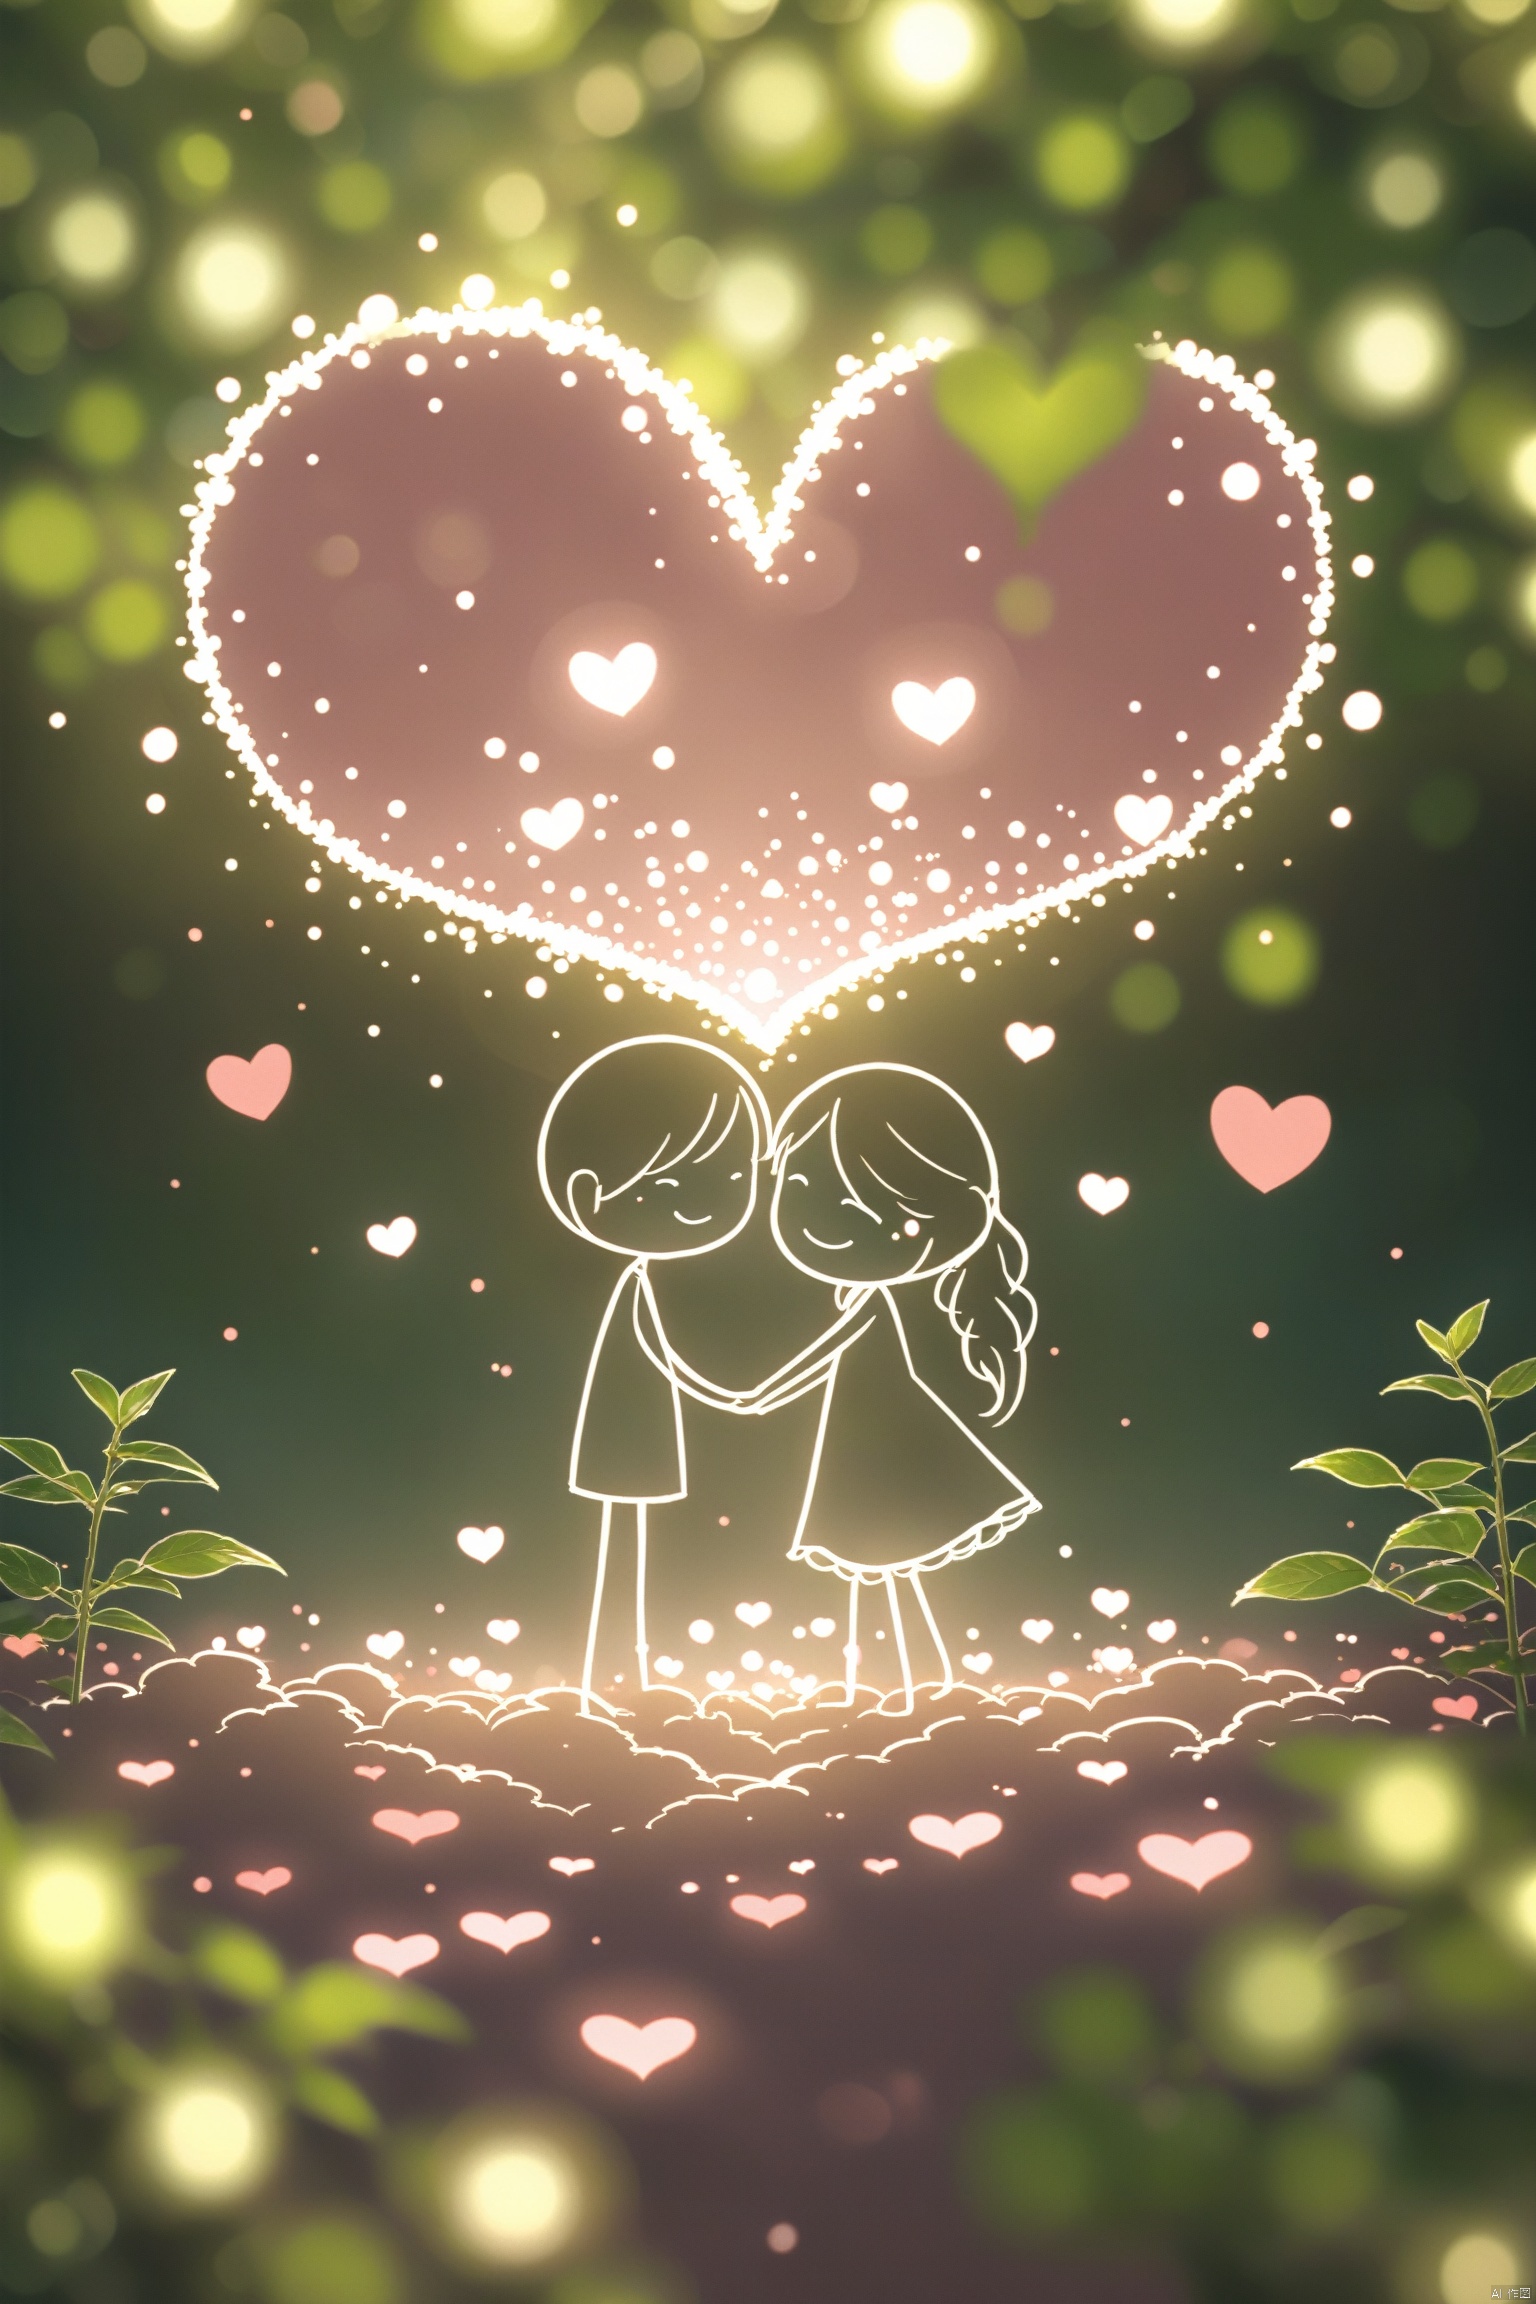 Valentine's Day poster design features lovers holding hands,hugging,pink fantasy and kissing,surrounded by rose hearts,romantic,loving,dreamy,artistic and dreamy heart-shaped tree background,super-perfect picture quality,super-perfect details,clear visual design,illustration and flat illustration.,